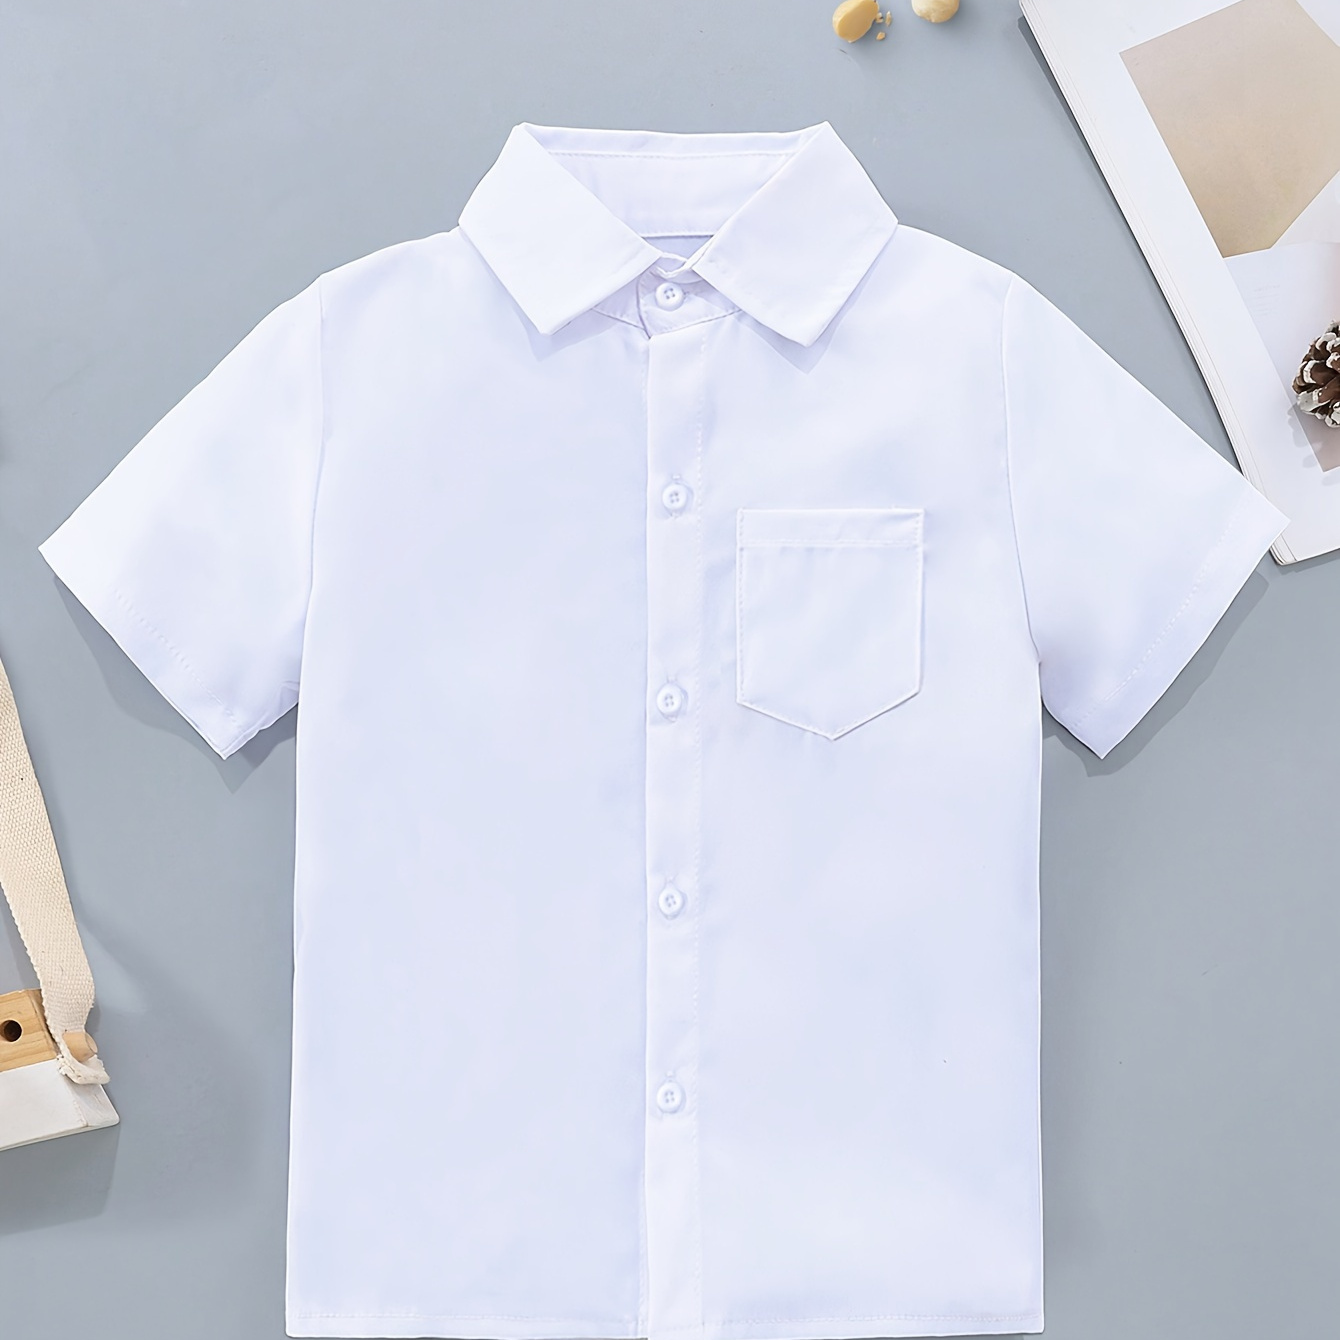 

Boys Solid Color Dress Button Up Shirt, Casual Short Sleeve Lapel Shirt Tops, Boys Clothes For Summer Outdoor